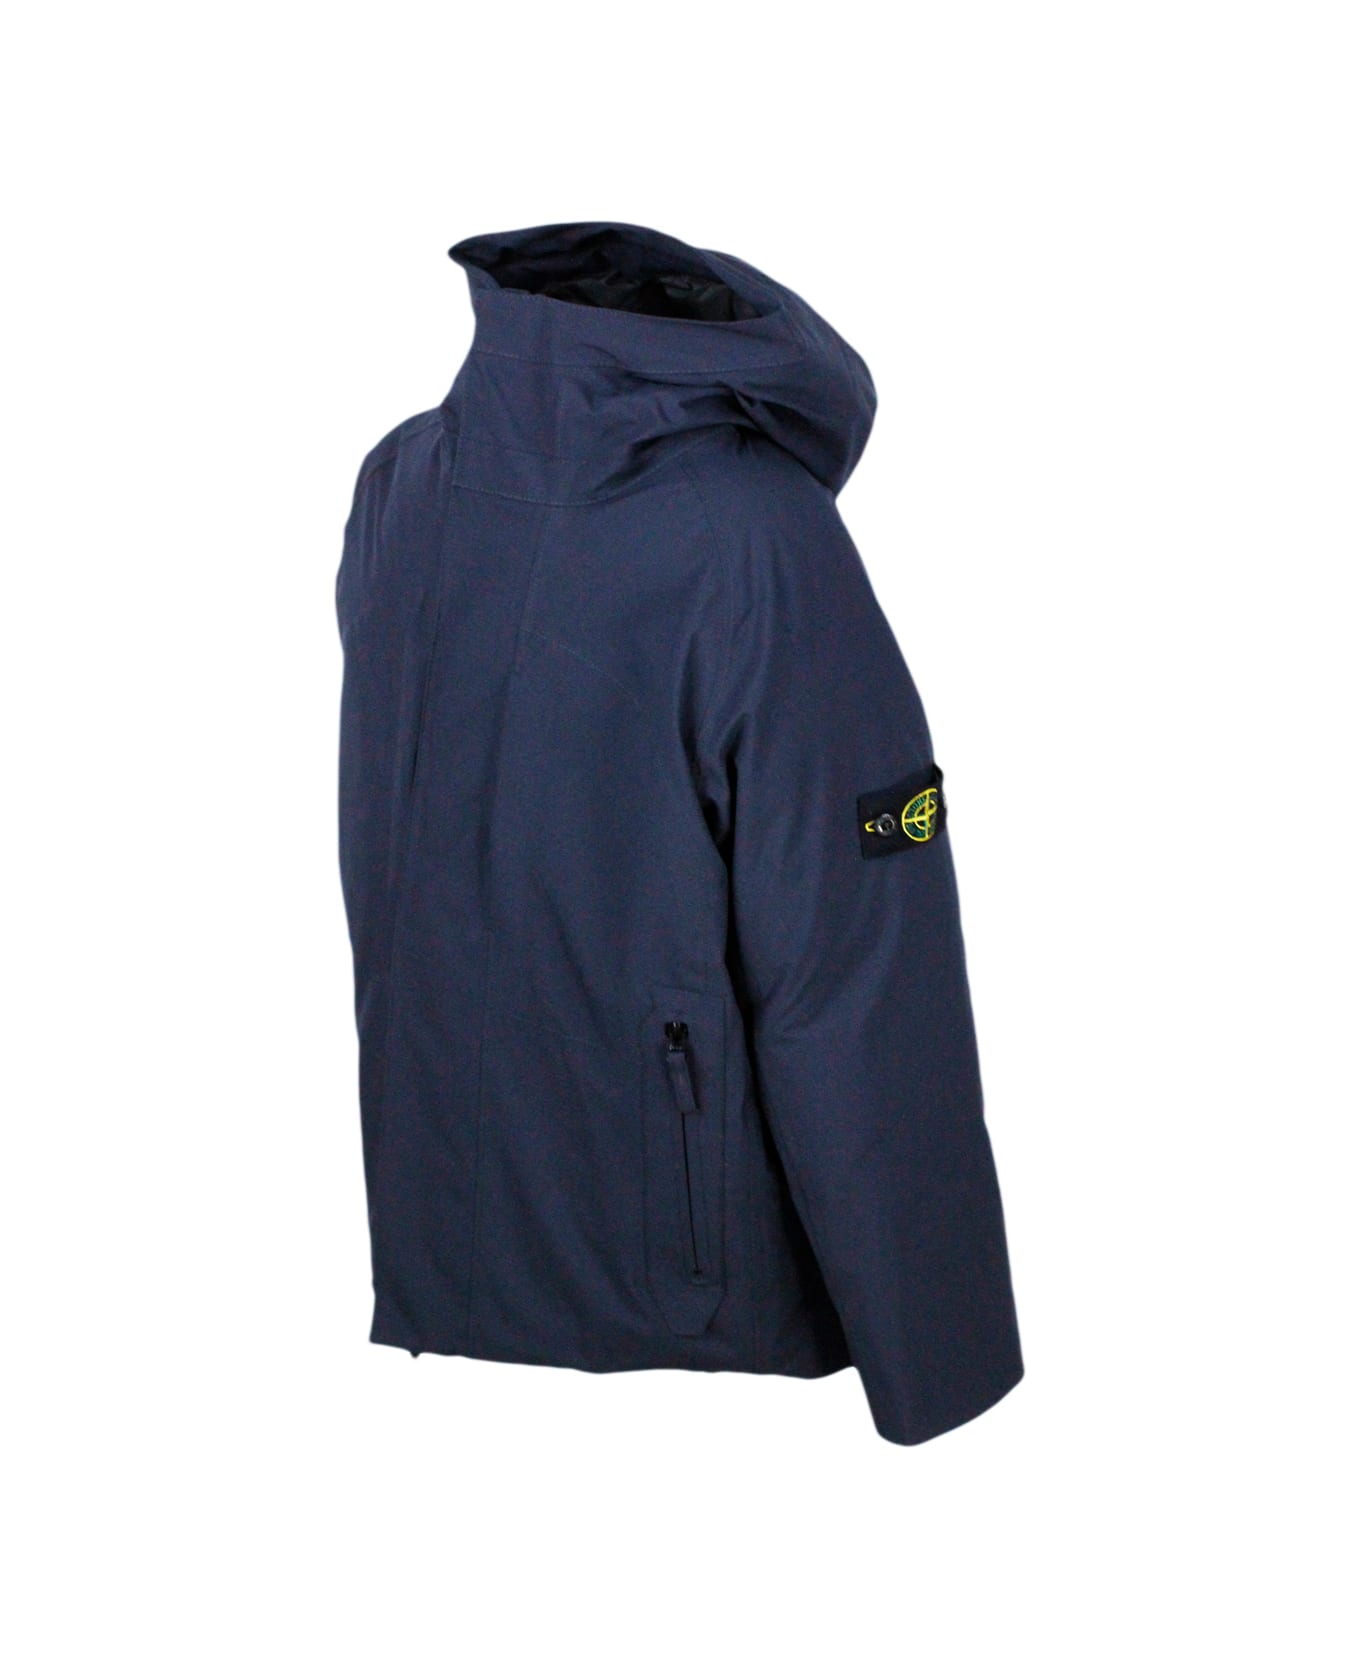 Stone Island Junior Padded Down Jacket With Hood In Technical Fabric Made With Recycled Bottles E.dye Technology With 100% Real Goose Down Padding - Blu コート＆ジャケット